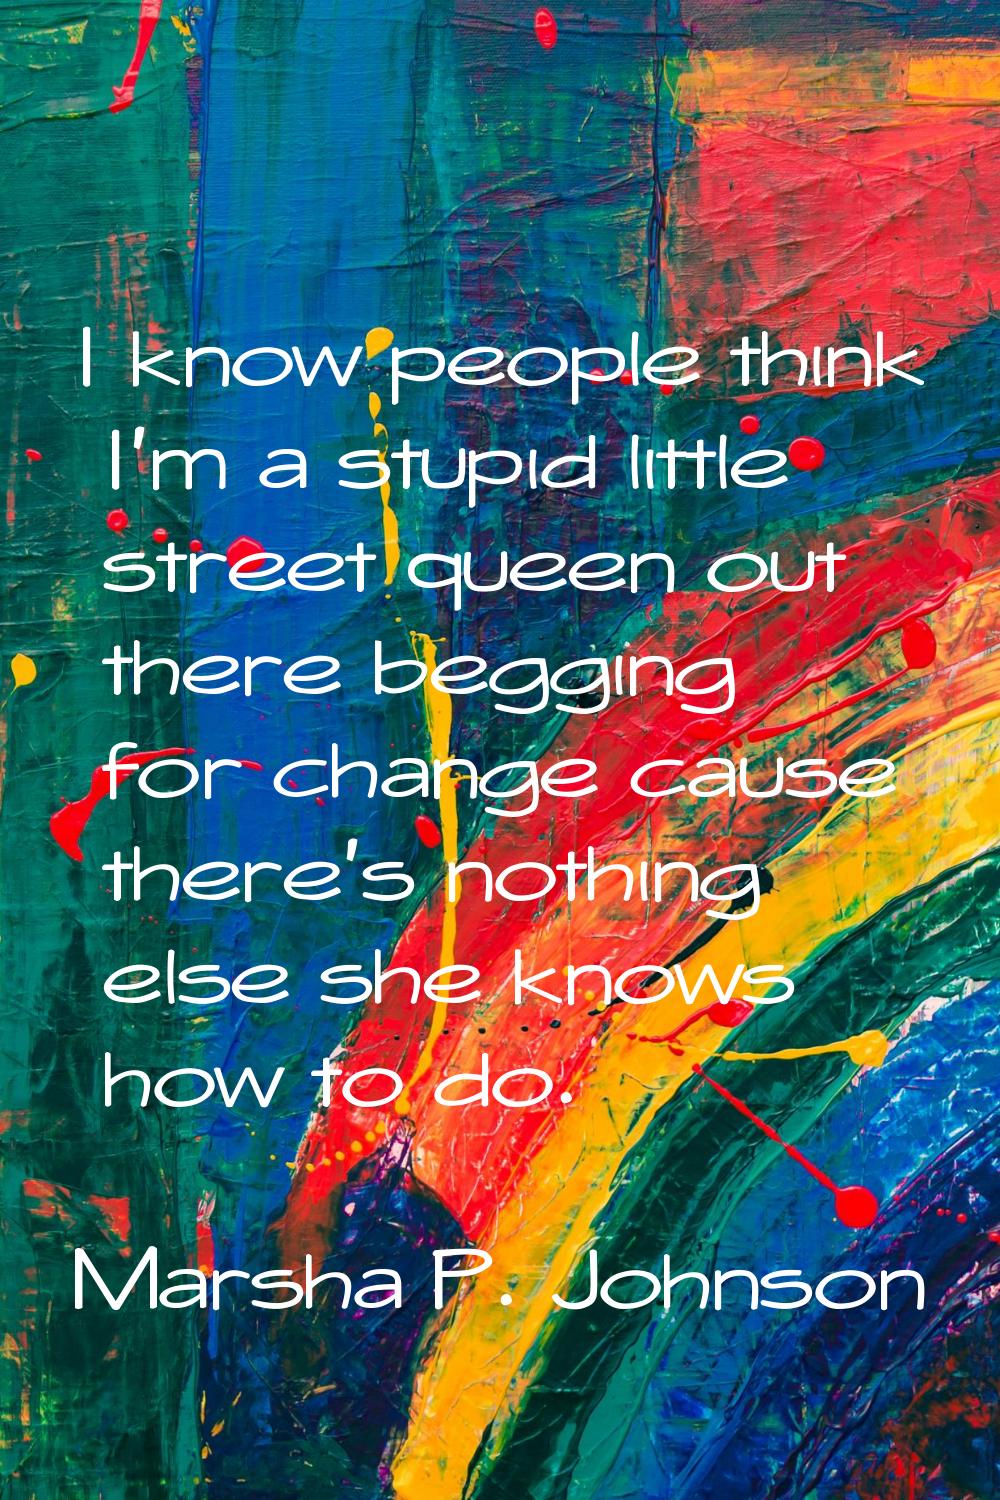 I know people think I'm a stupid little street queen out there begging for change cause there's not